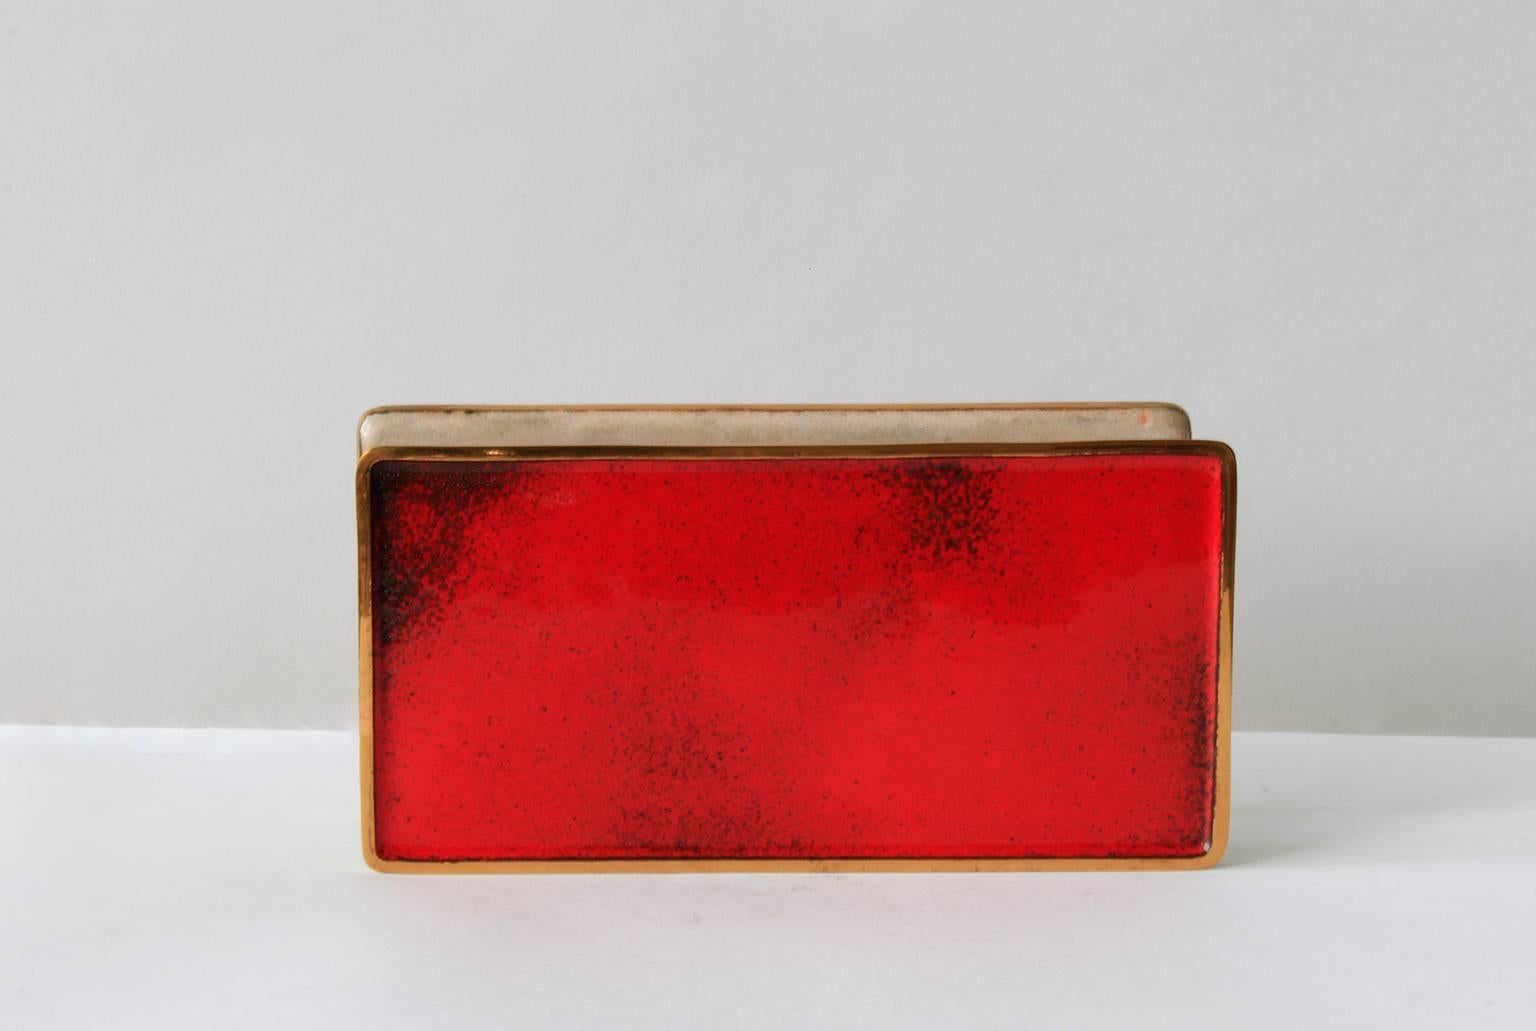 Spectacular door handles in hand-polished enamel on brass created in collaboration by two of Italy's most important 20th century designers, Gio Ponti and Paolo De Poli. This example features a strong red glaze on the exterior surfaces and a